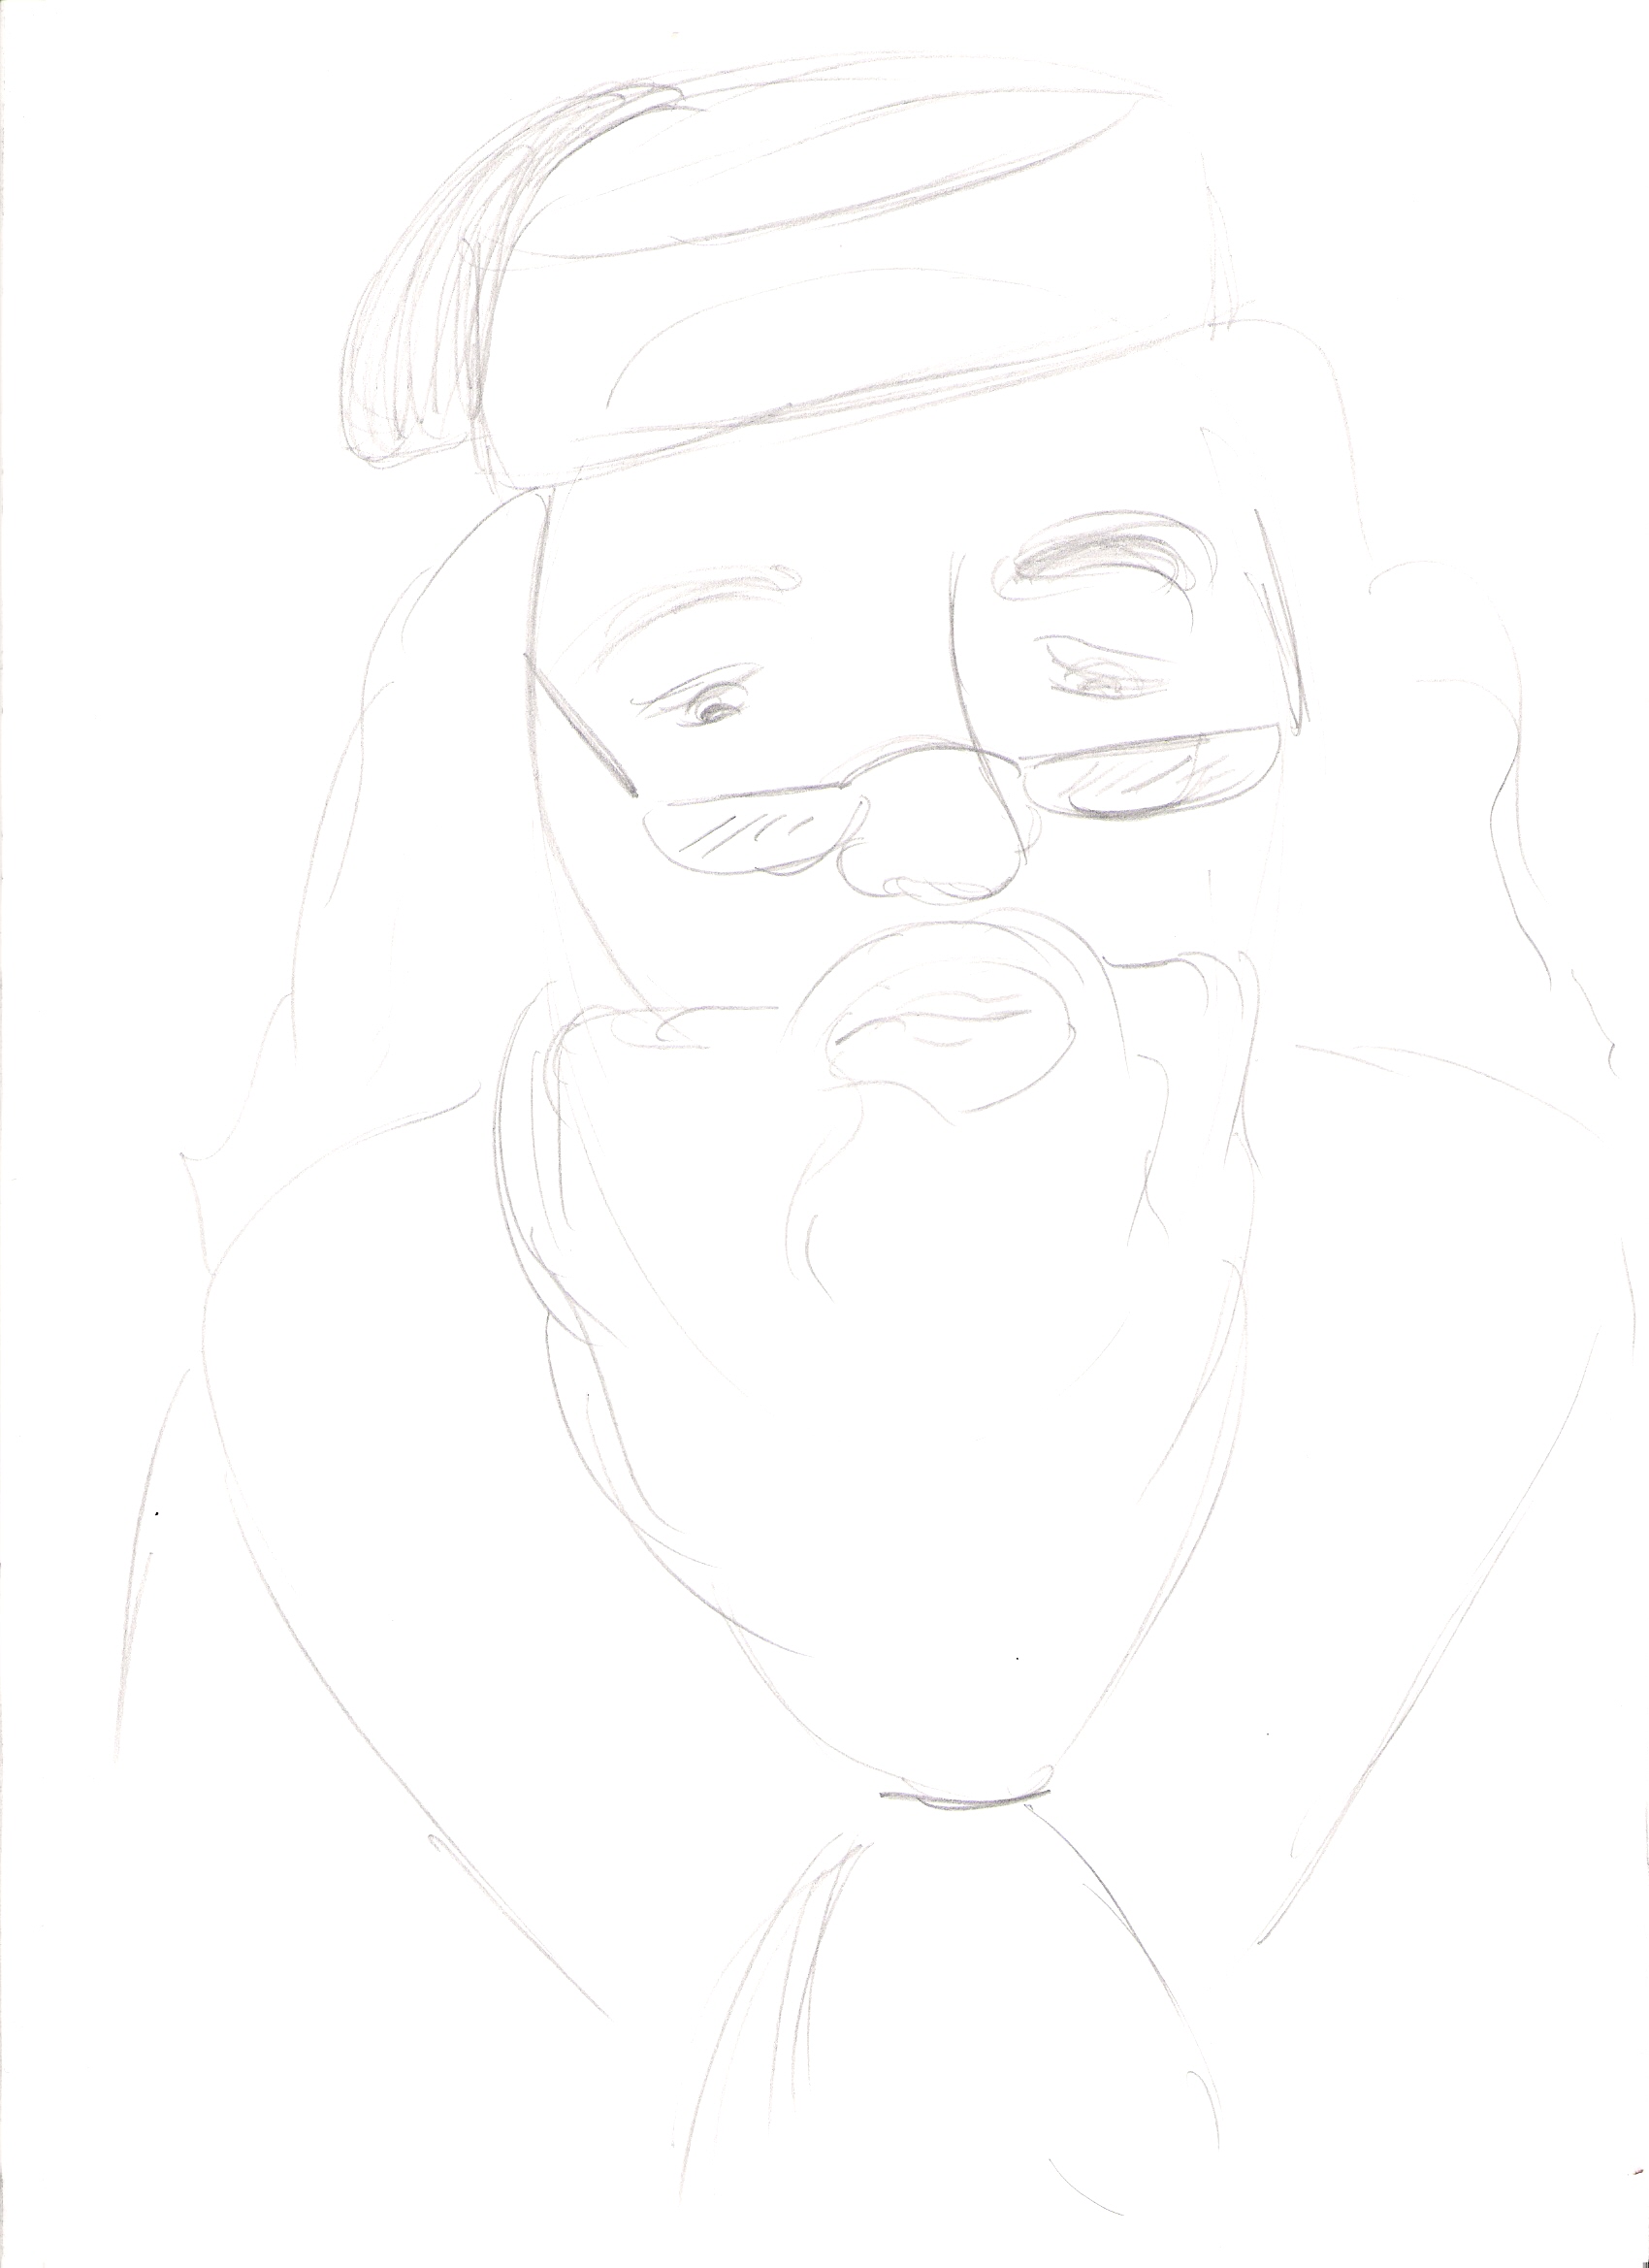 Michael Gambon as Dumbledore by Bad_Wolf_of_Hogwarts